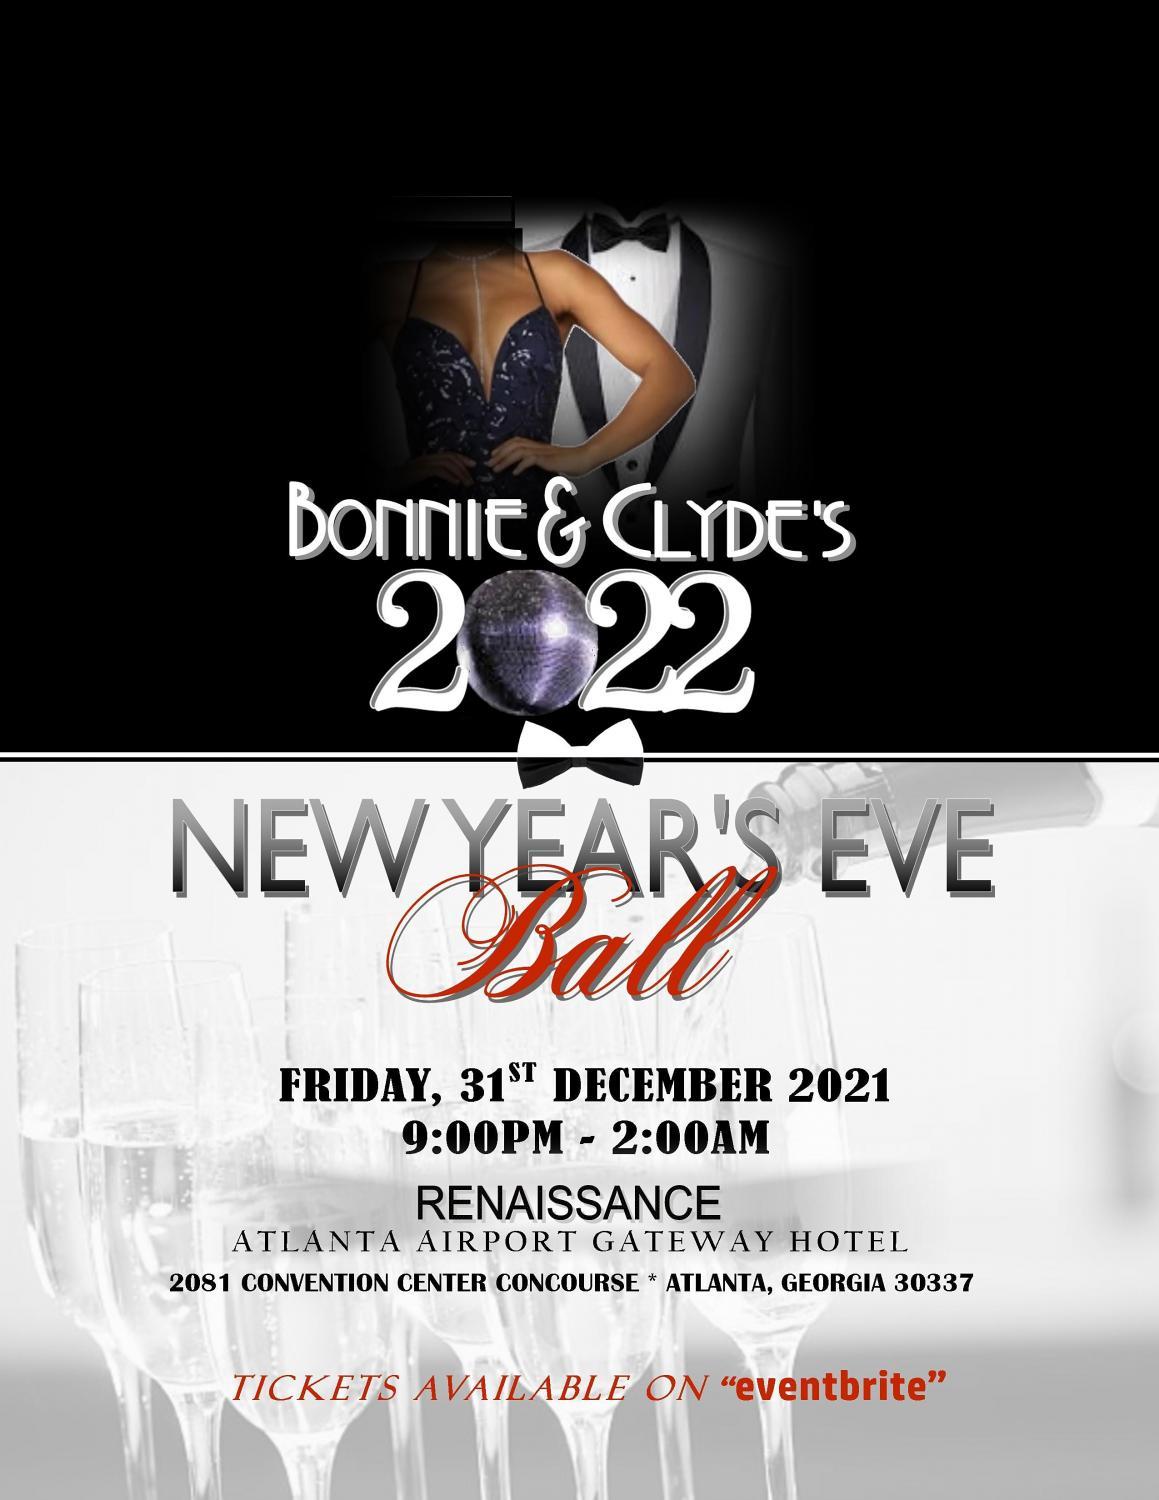 Bonnie & Clyde's 2022 New Year's Eve Ball